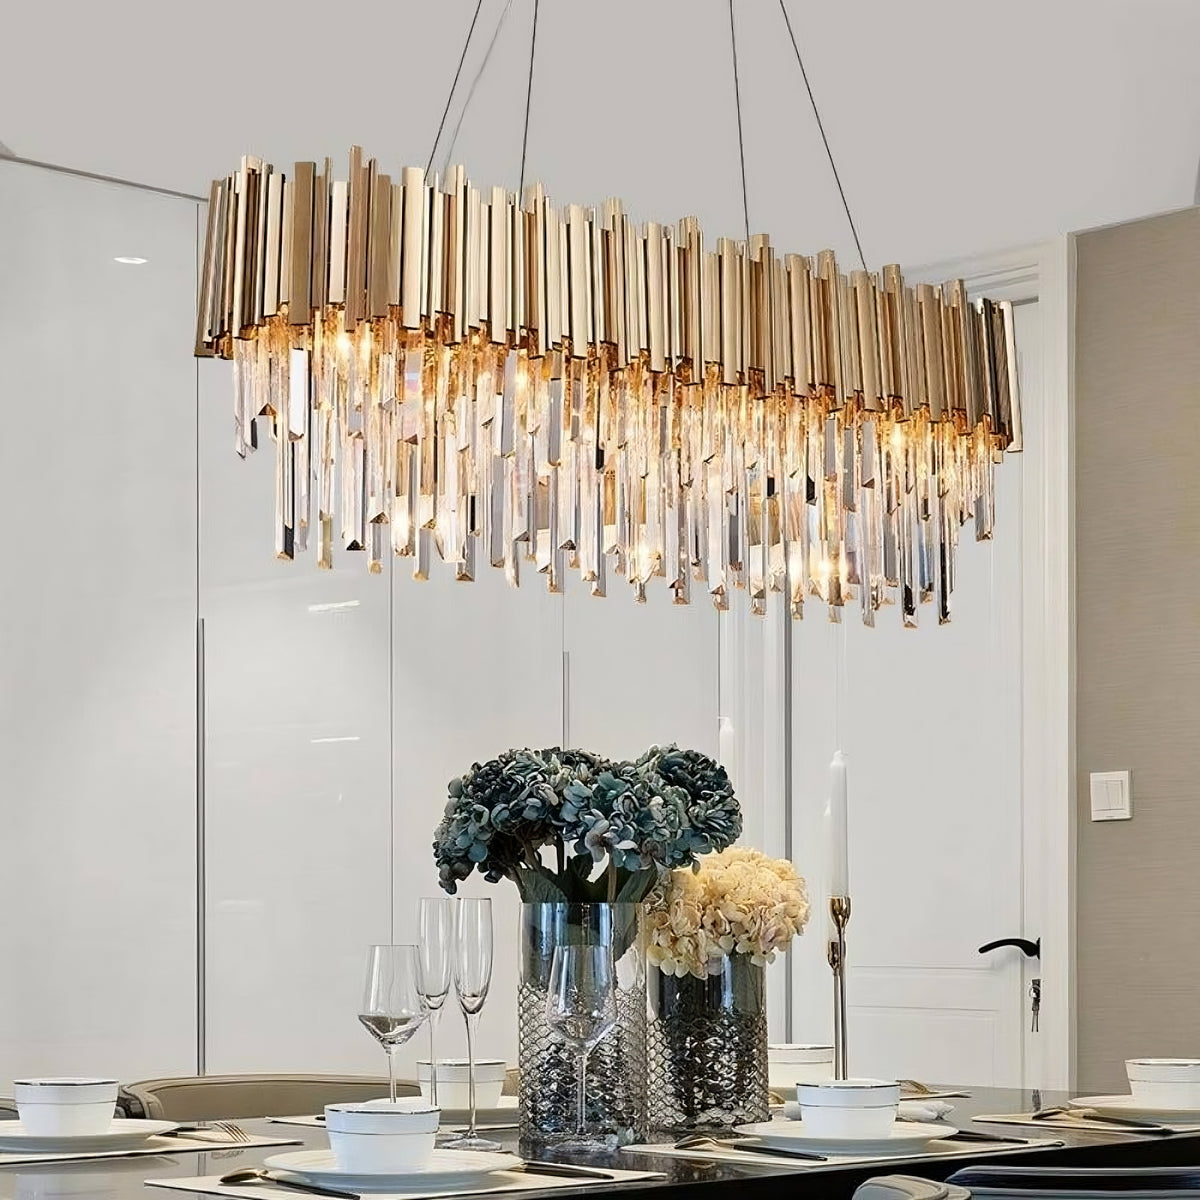 A modern dining room with a large, elegant Gio Crystal Dining Room Chandelier made of hanging gold and crystal elements over a table decorated with a vase of blue and cream flowers and empty wine glasses from Morsale.com.